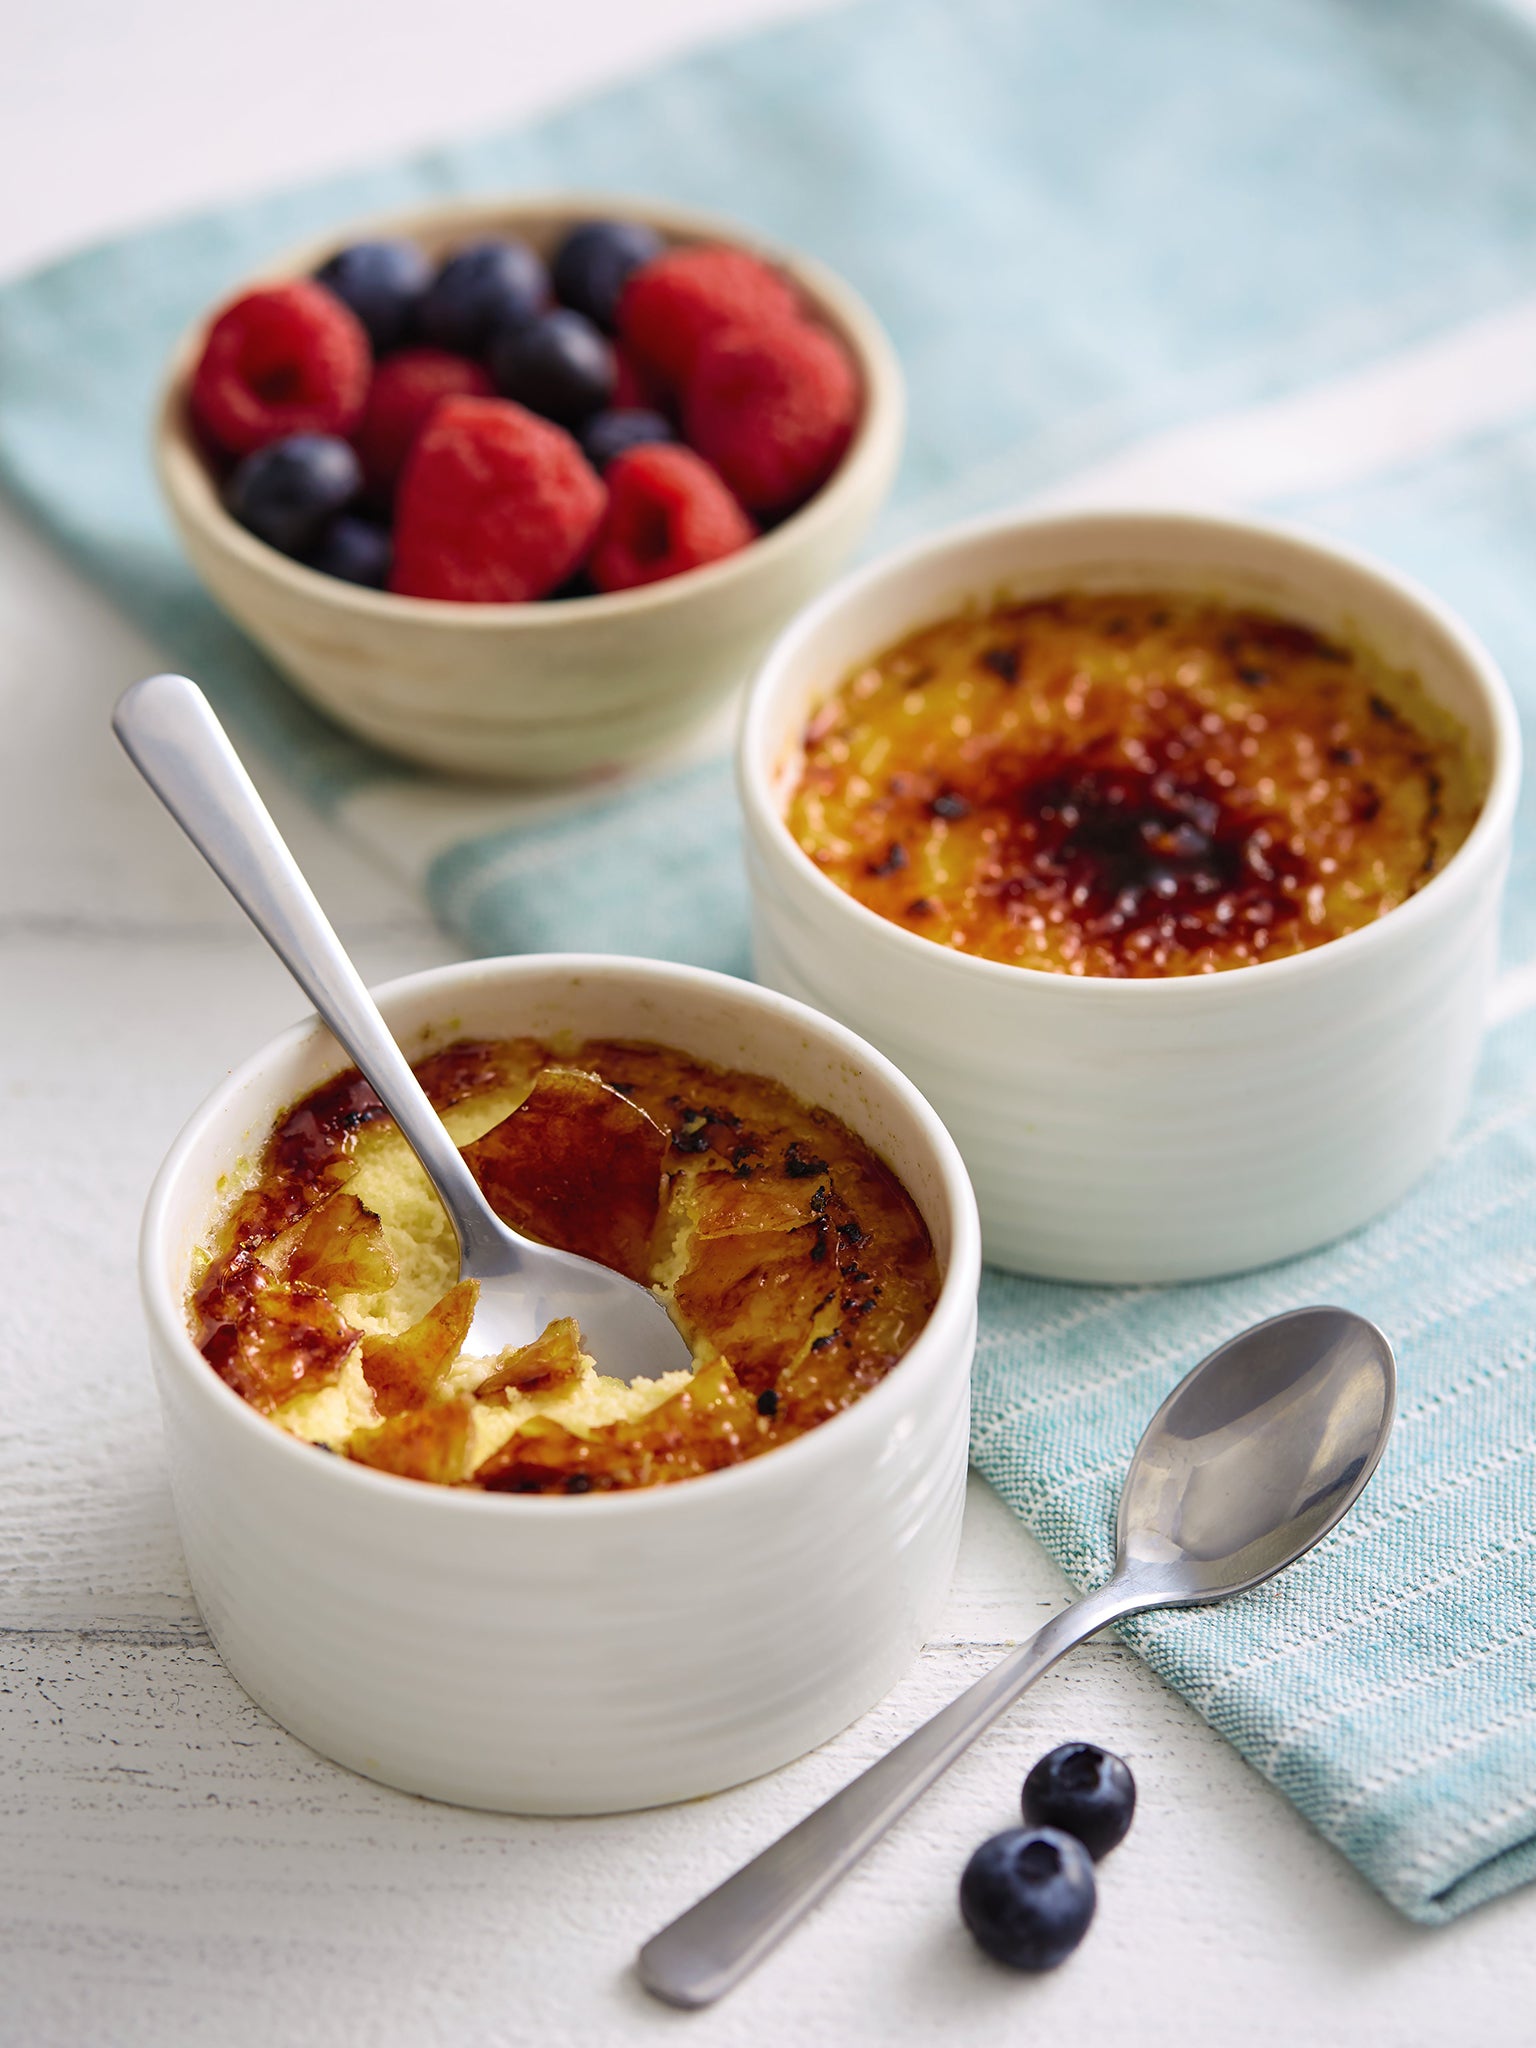 An alcoholic creme brulee that’s every bit as dreamy